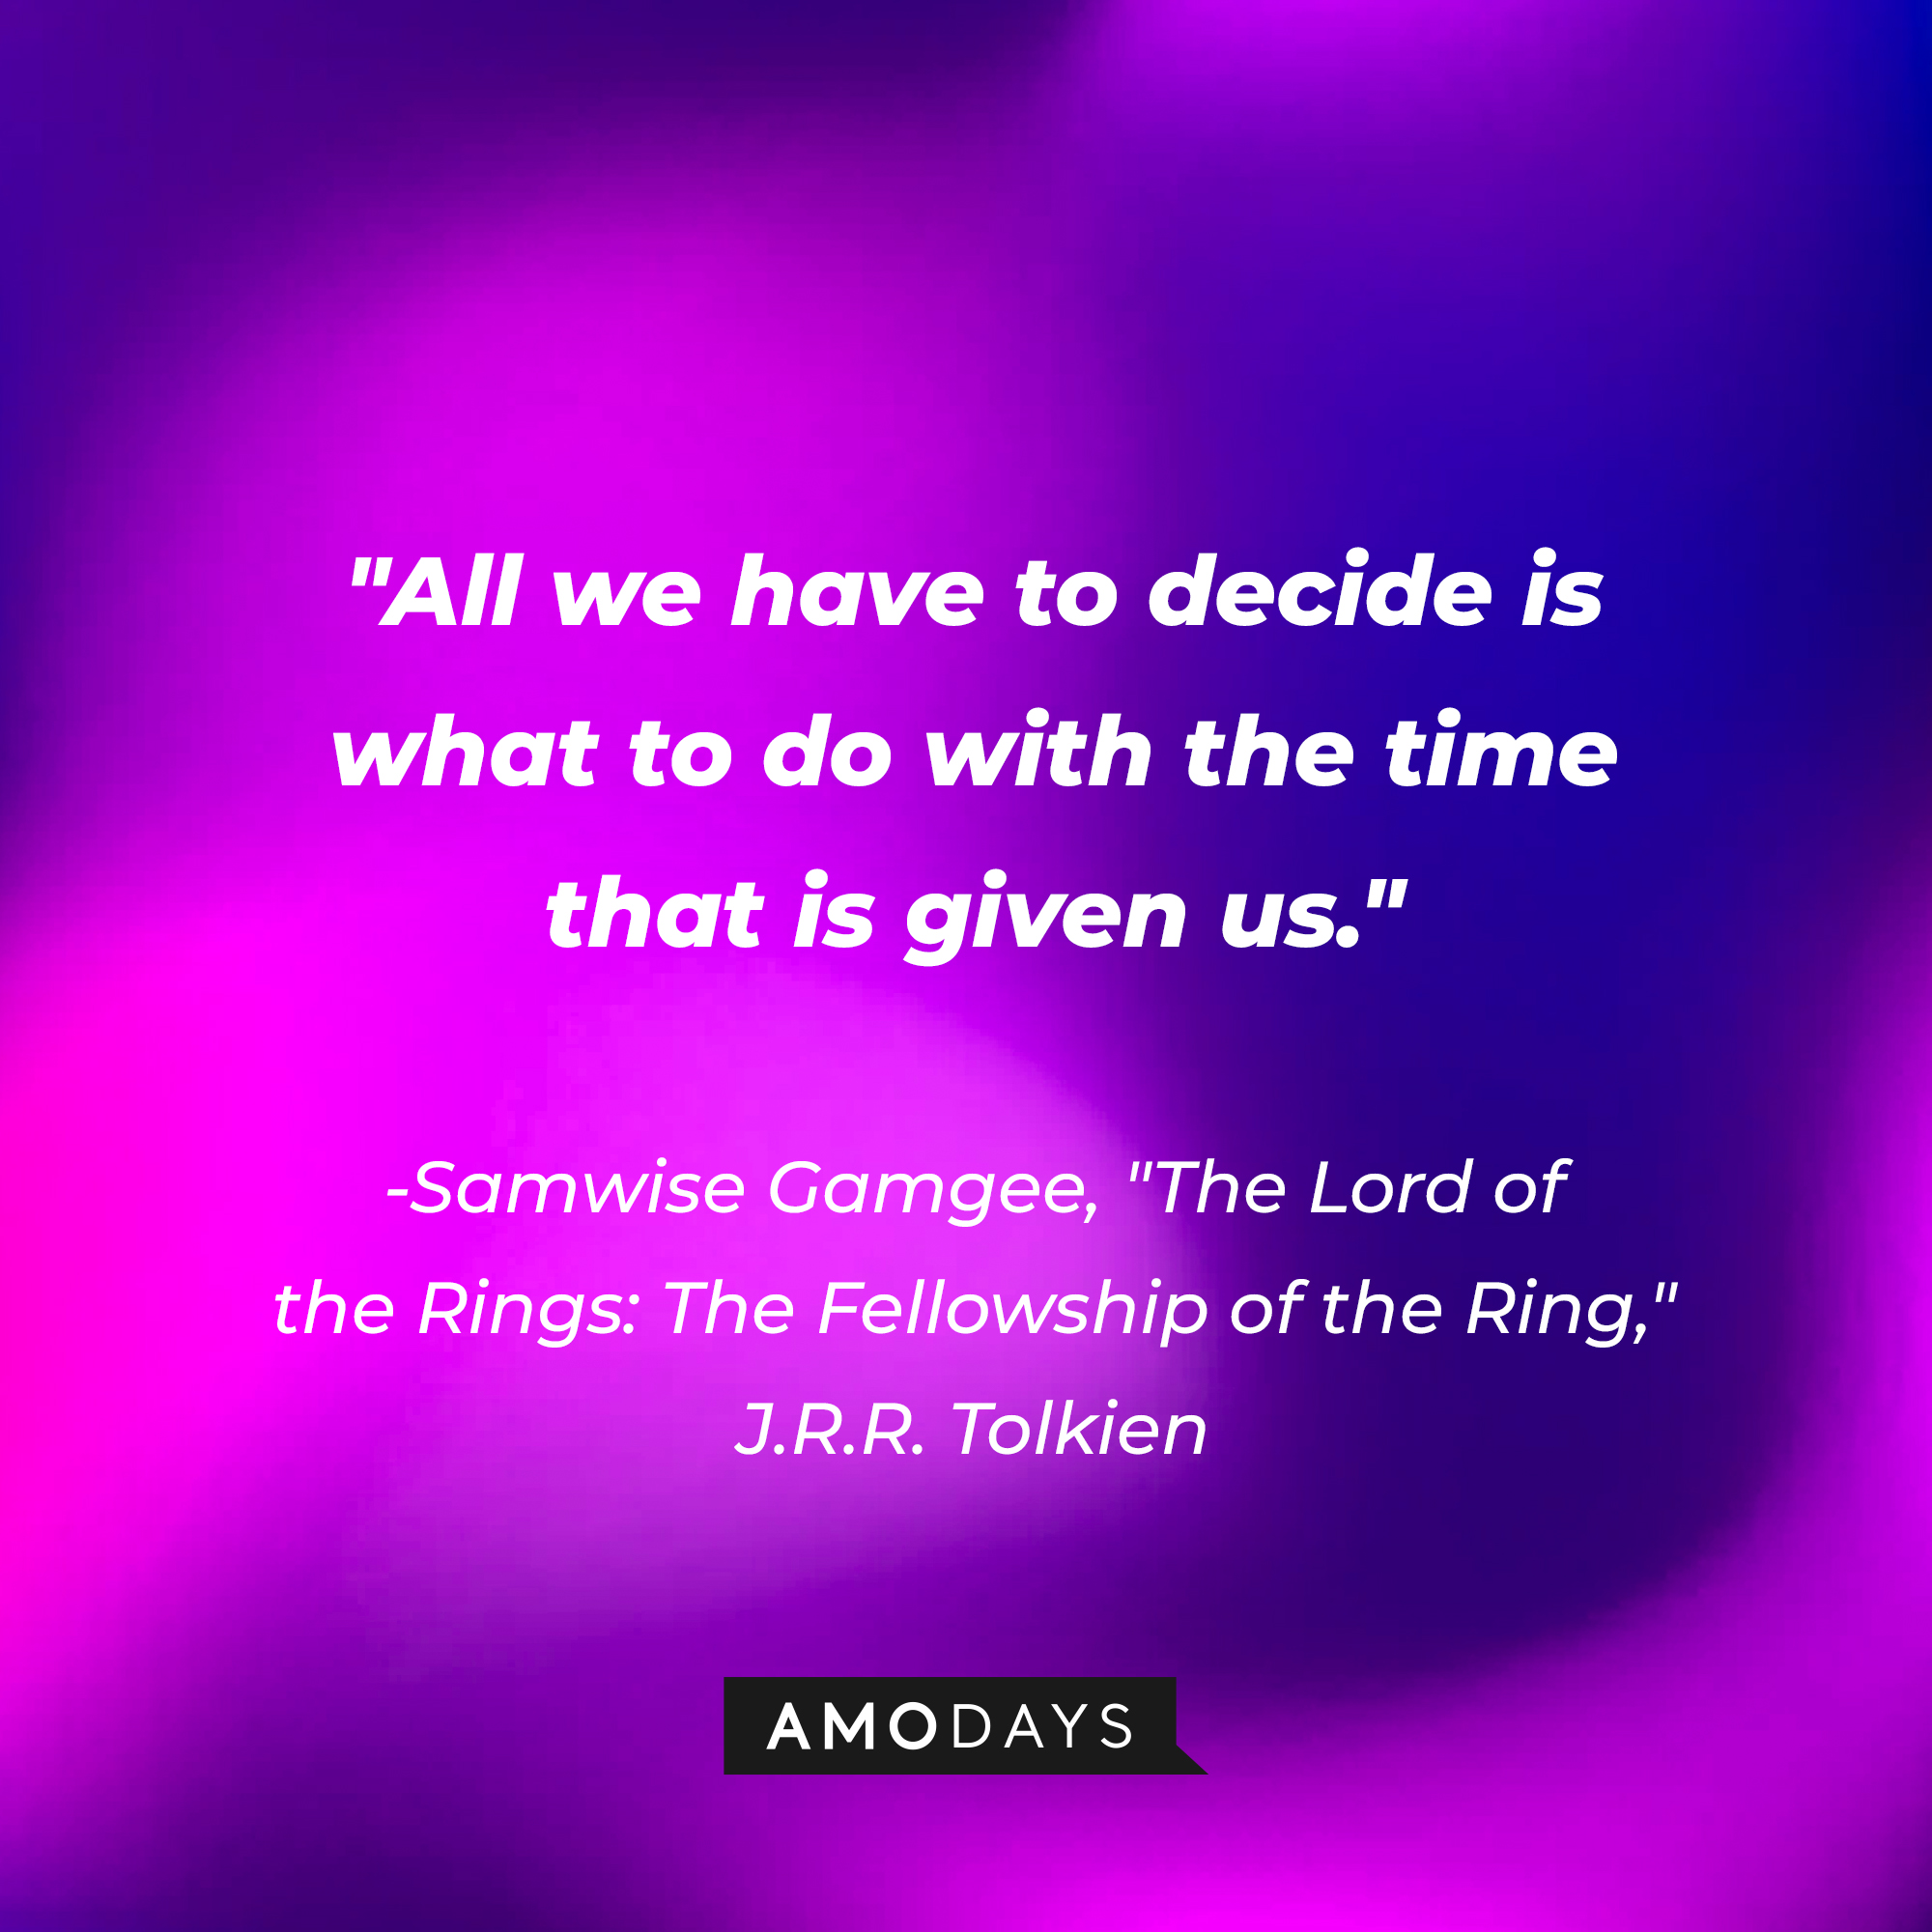 Samwise Gamgee’s quote from “The Lord of the Rings: The Fellowship of the Ring” by J.R.R Tolkien: “All we have to decide is what to do with the time that is given us.” | Source: AmoDays